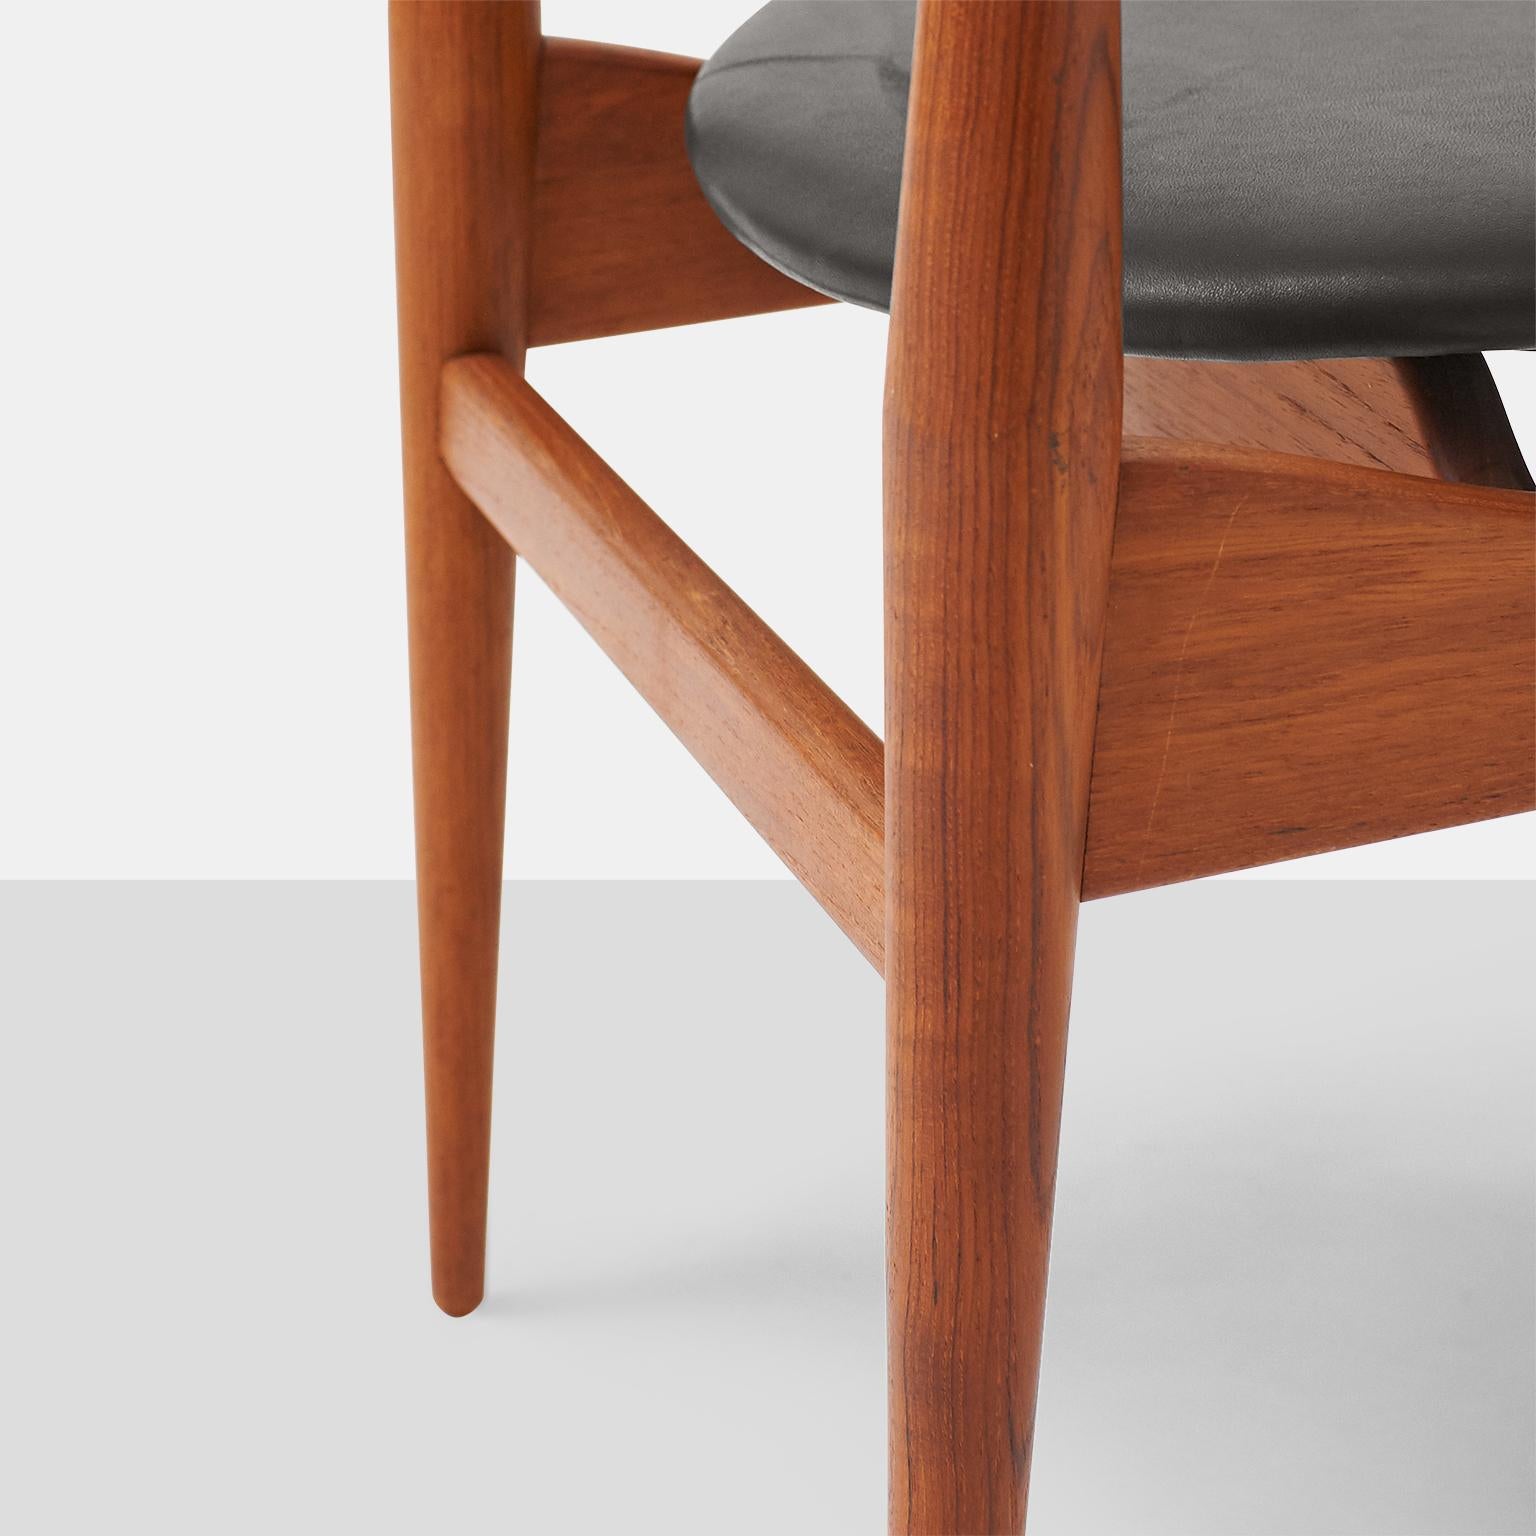 Pair of Dining Chairs by Inge & Luciano Rubino 1